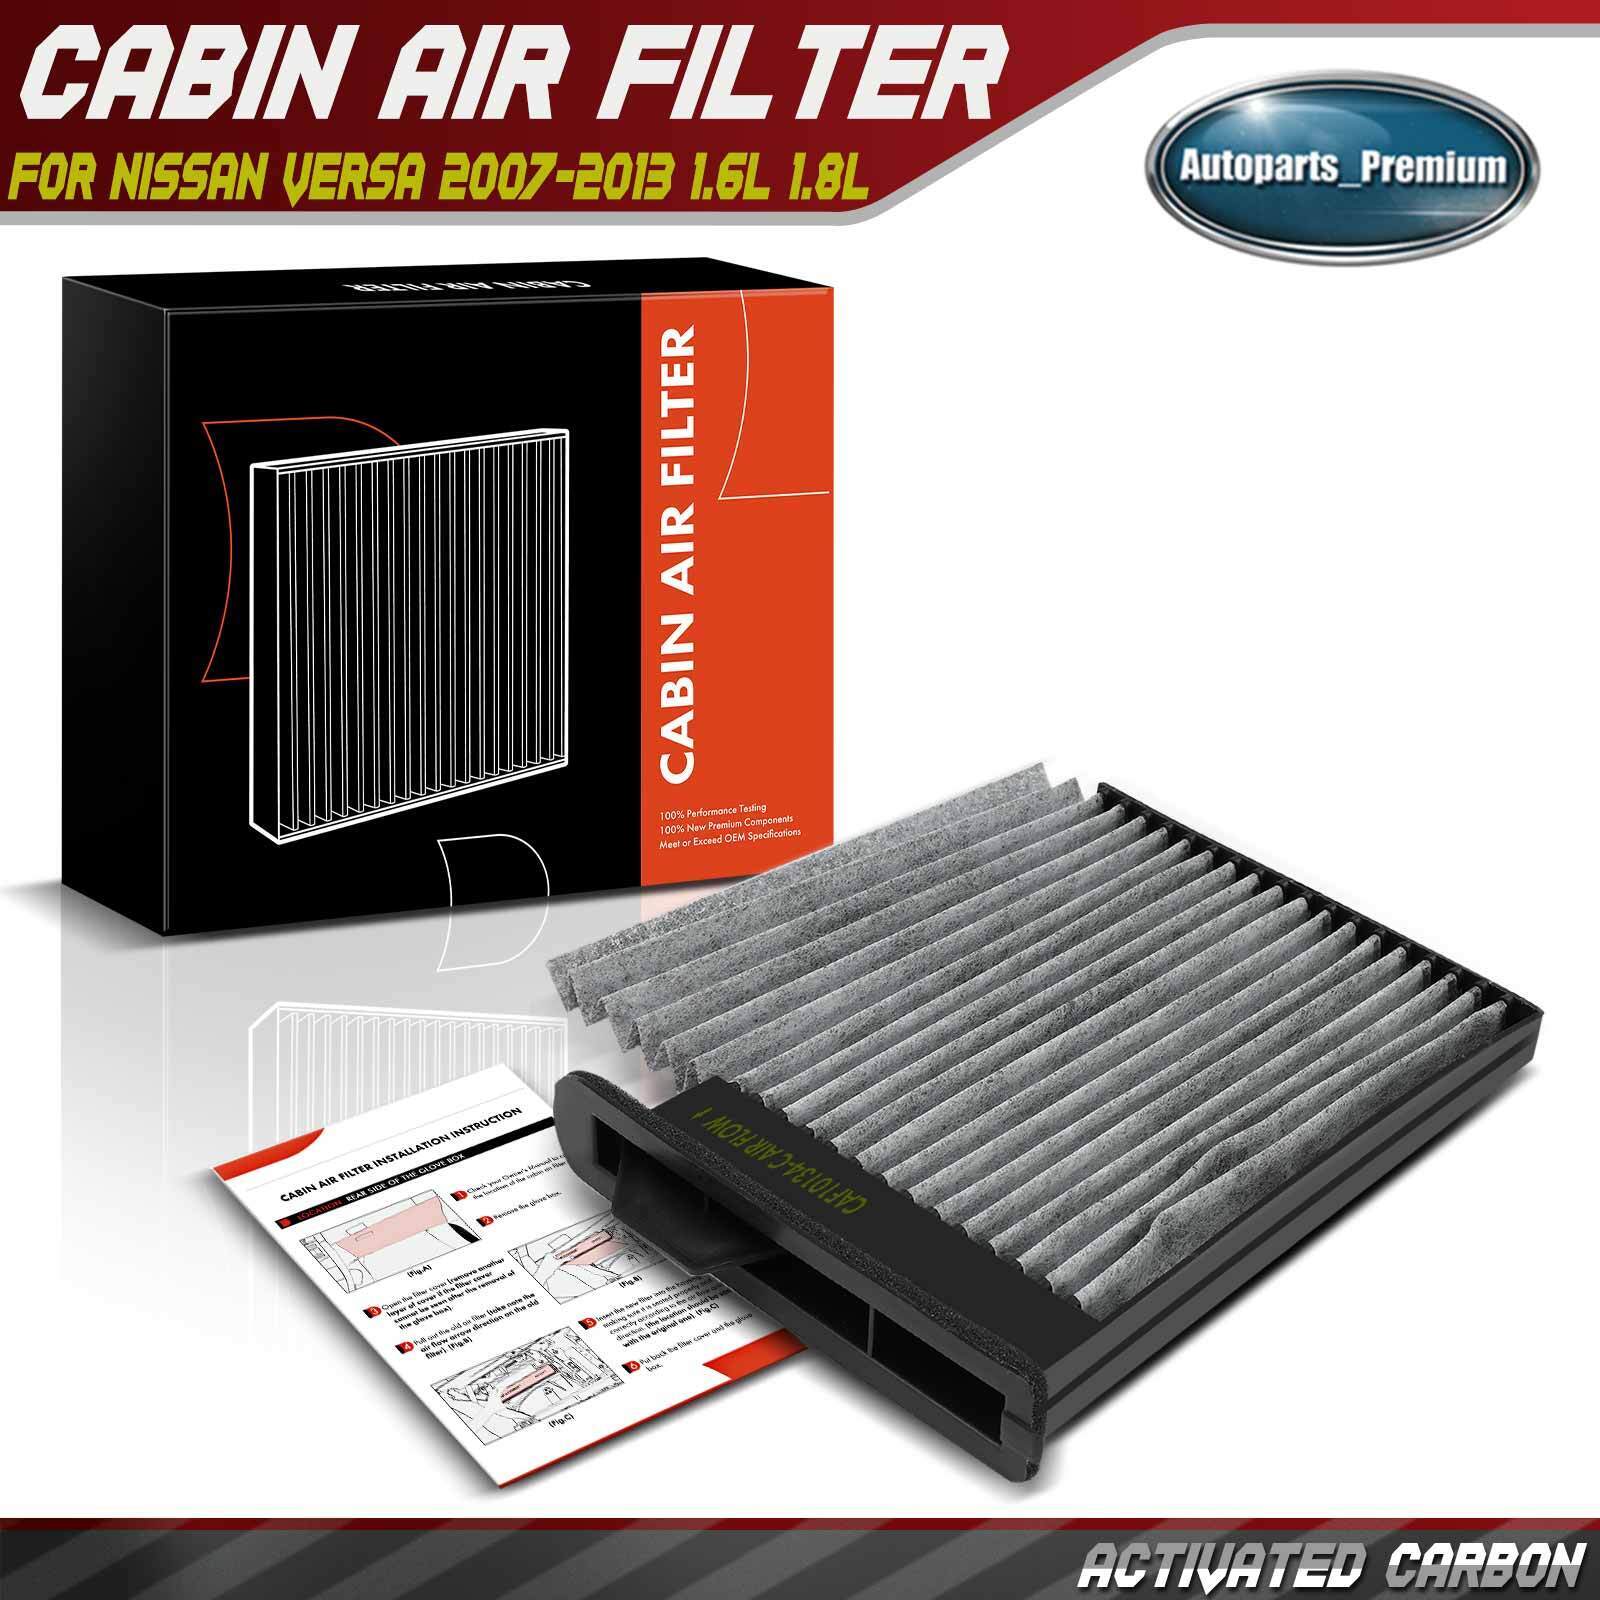 1x Activated Carbon Cabin Air Filter for Nissan Versa 2007 2008-2013 1.6L 1.8L